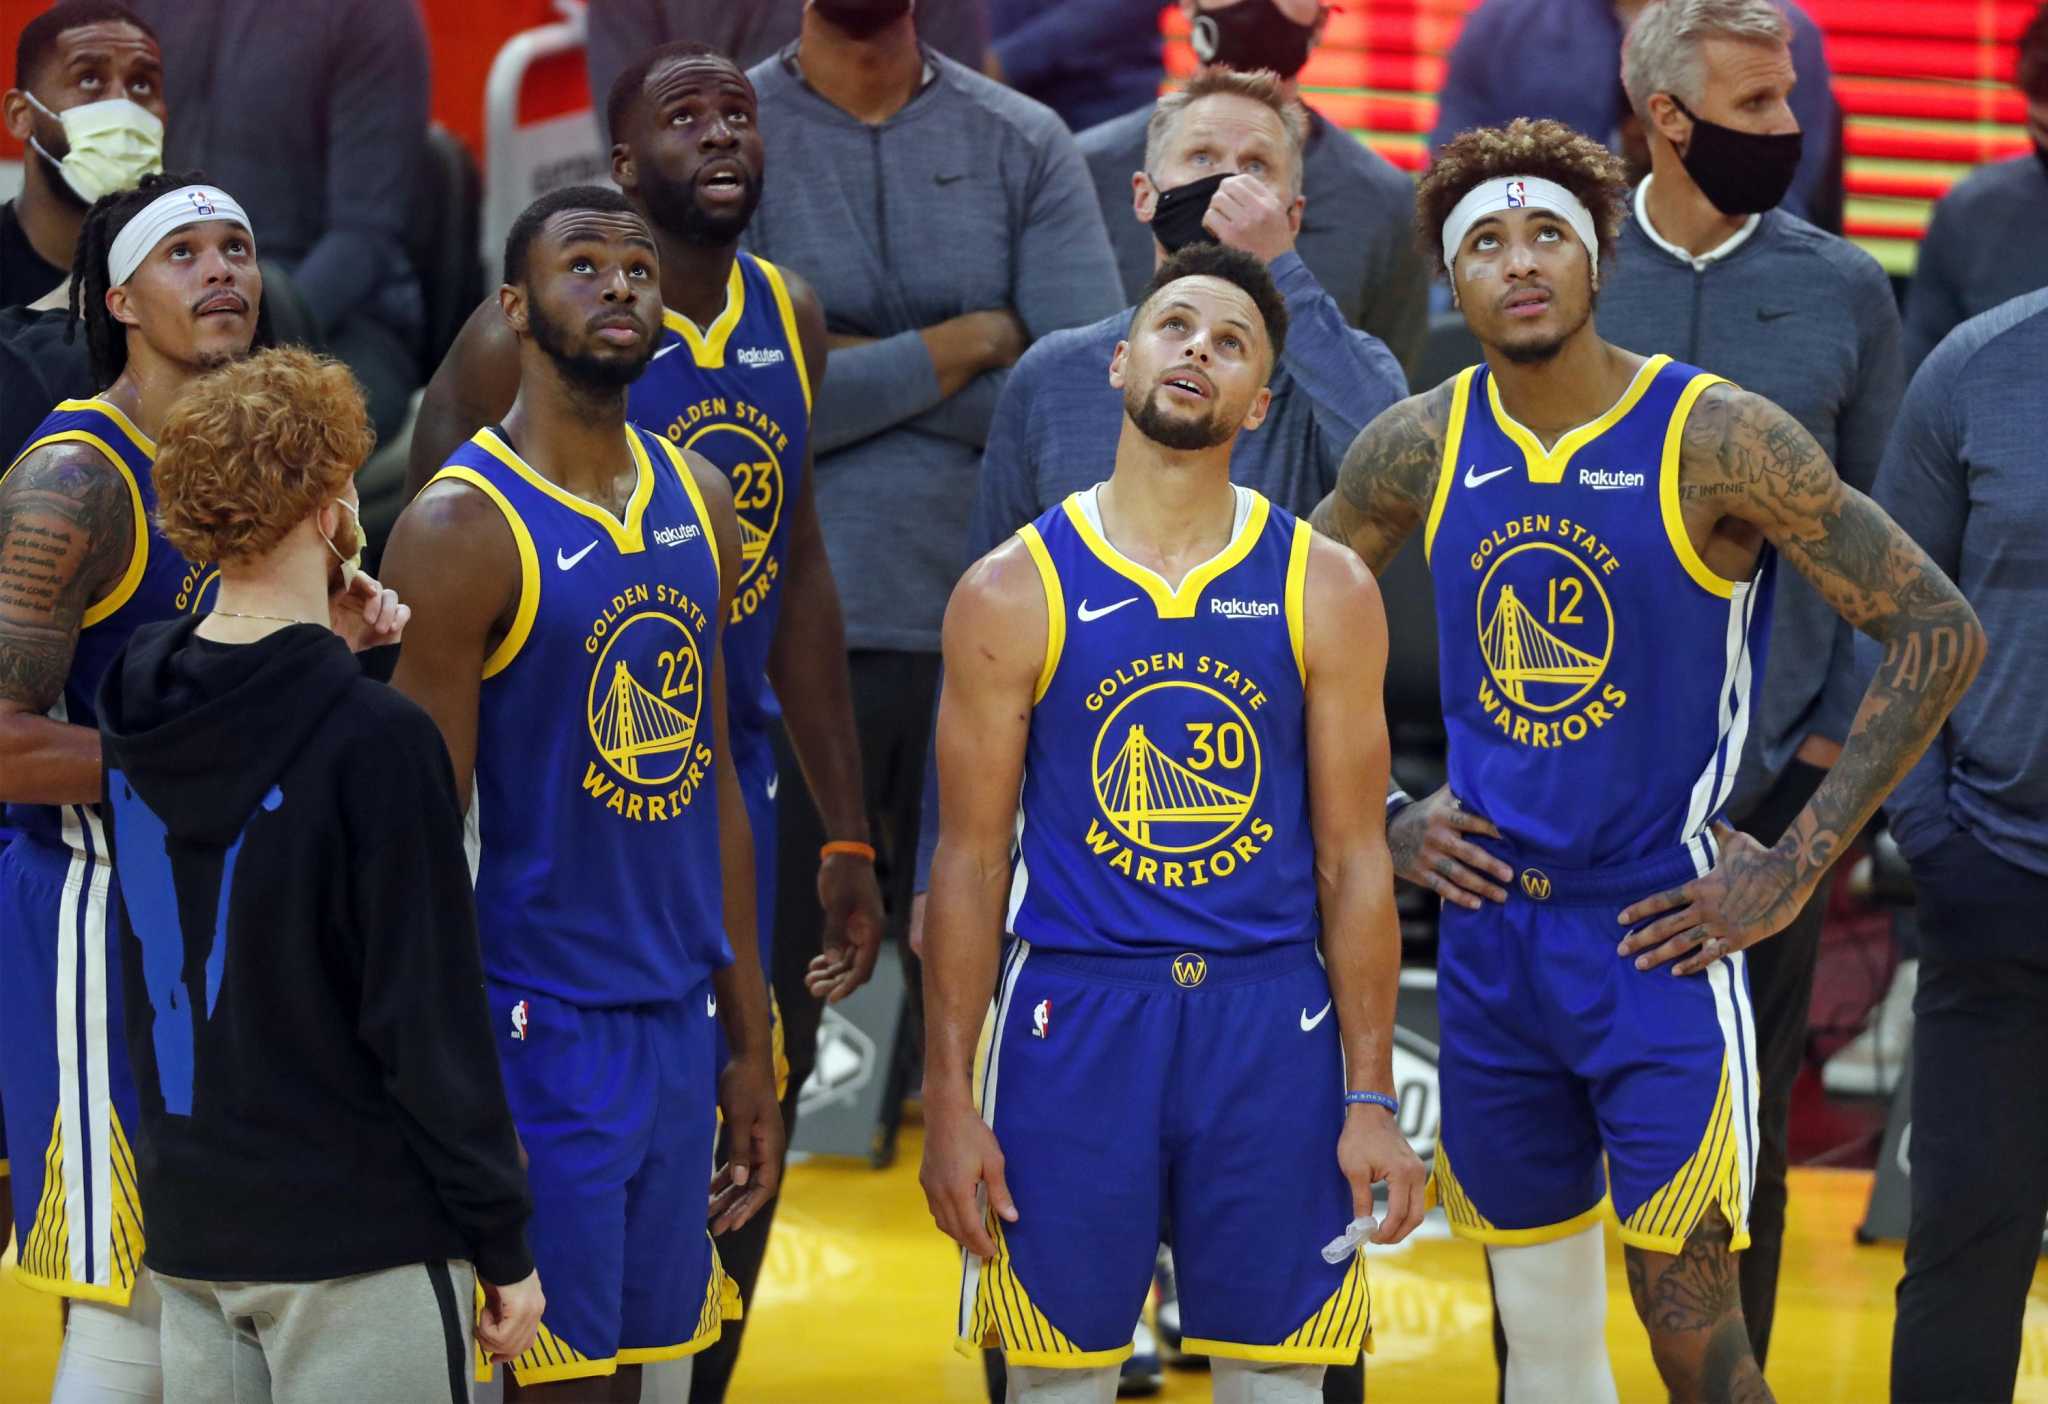 Playin tournament primer What to know about Warriors’ path to playoffs